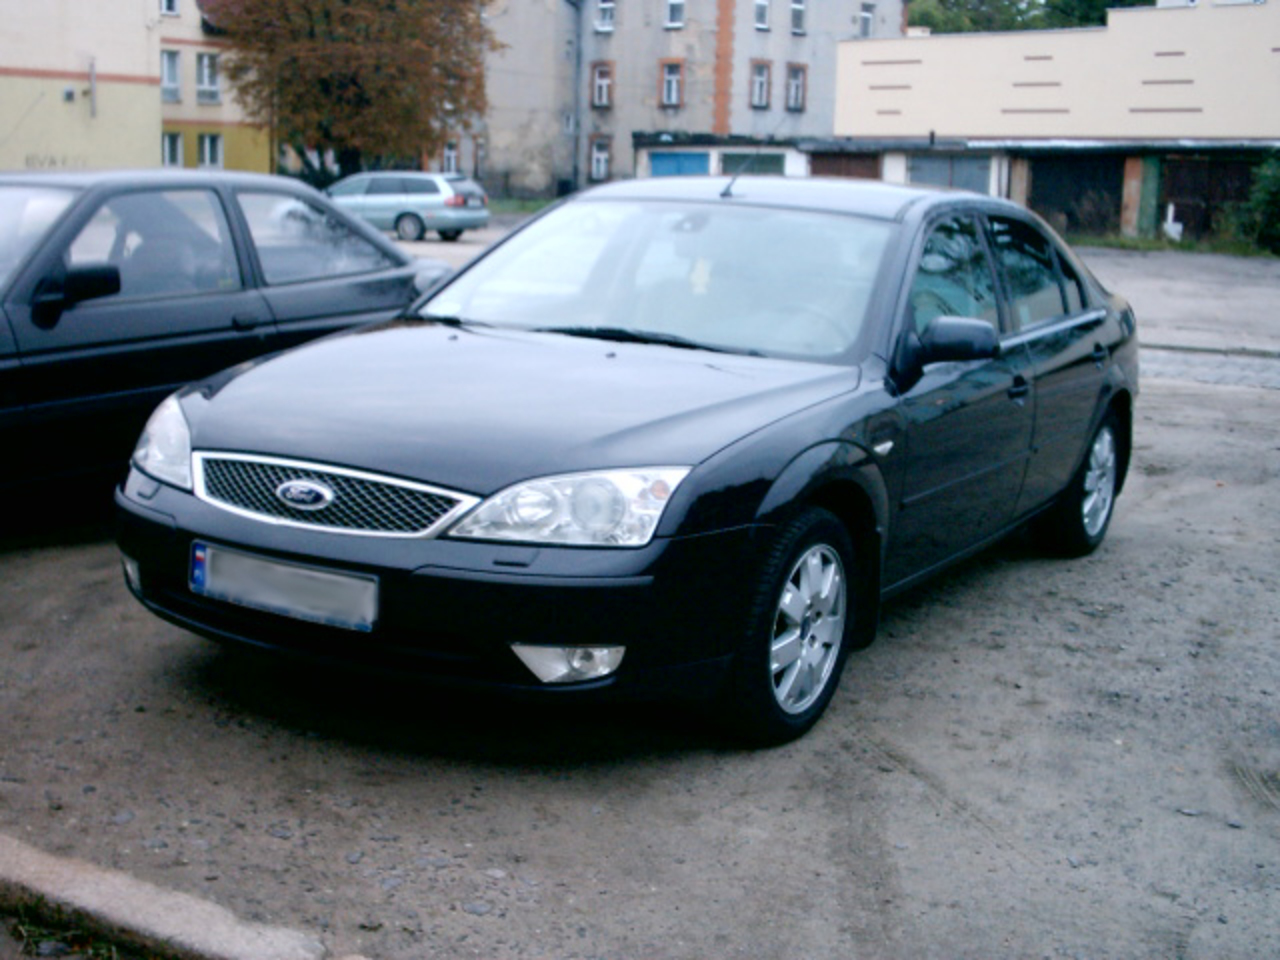 File:Silver Ford Mondeo MK3.jpg - Wikimedia Commons